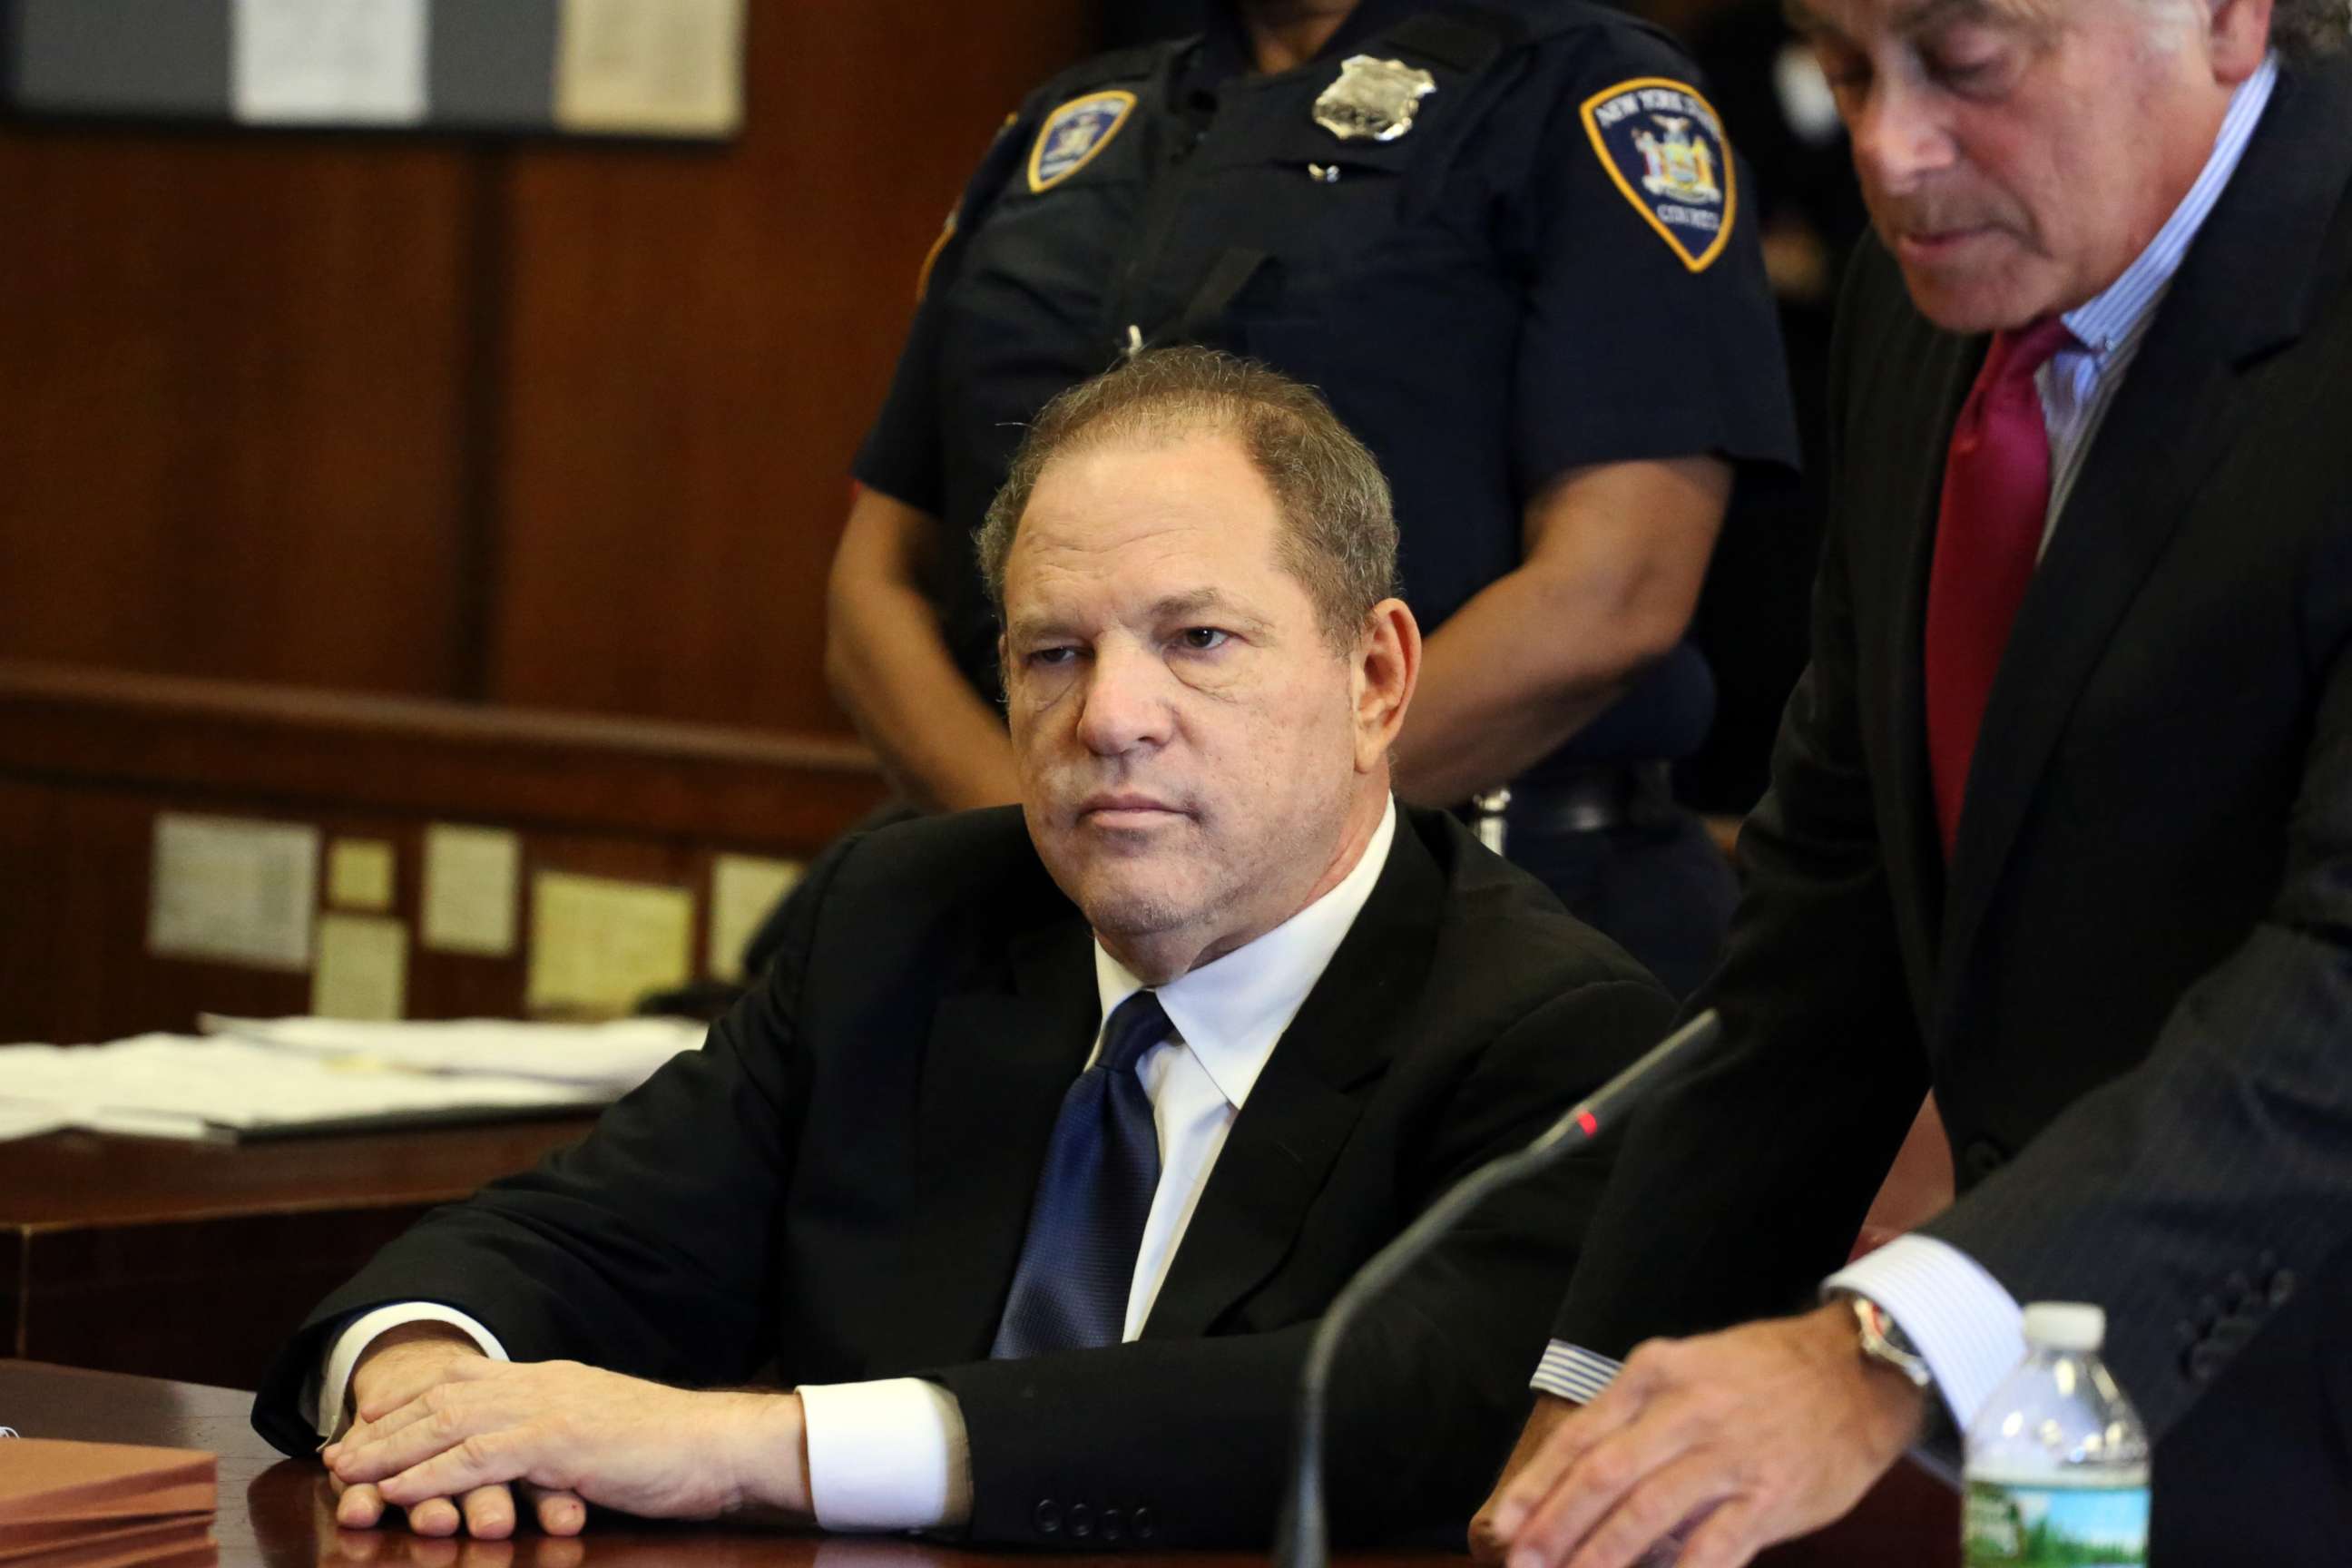 PHOTO: Harvey Weinstein appears at his arraignment in Manhattan Criminal Court on July 9, 2018 in New York.